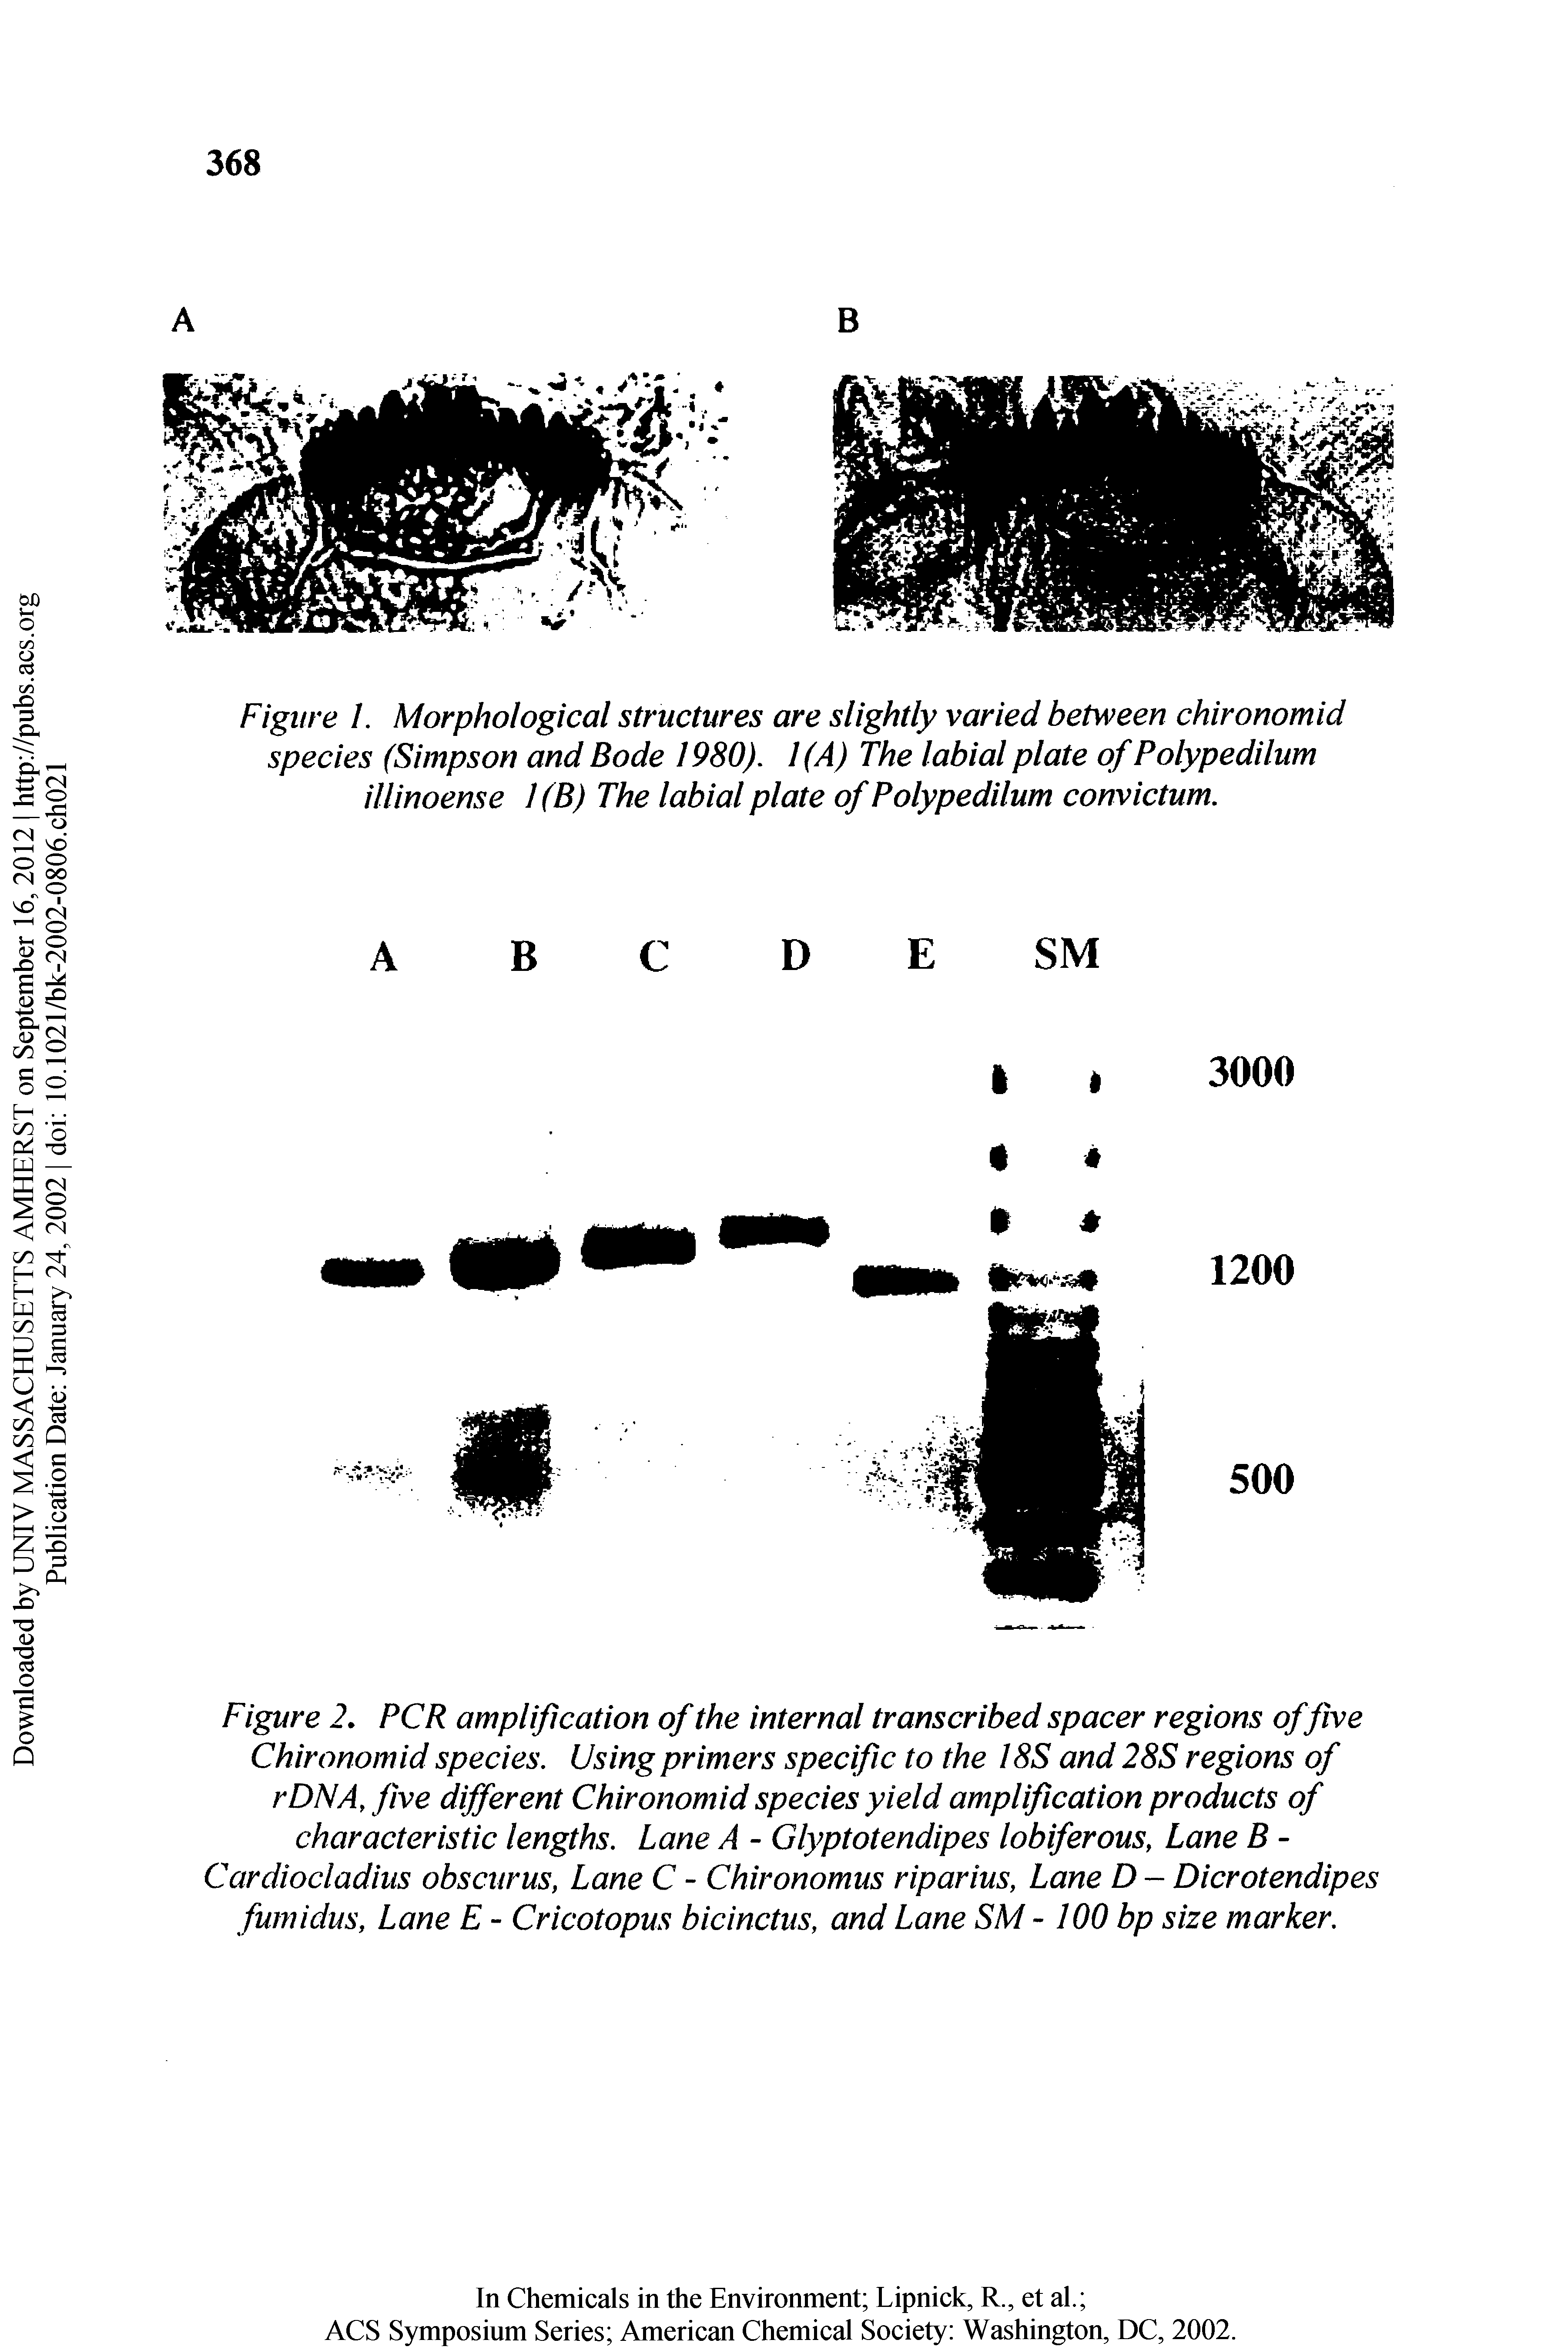 Figure 2. PCR amplification of the internal transcribed spacer regions of five Chironomid species. Using primers specific to the 18S and 28S regions of rDNA, five different Chironomid species yield amplification products of characteristic lengths. Lane A - Glyptotendipes lobiferous, Lane B -Cardiocladiiis obscurus, Lane C - Chironomus riparius, Lane D - Dicrotendipes fumidus, Lane E - Cricotopus bicinctus, and Lane SM -100 bp size marker.